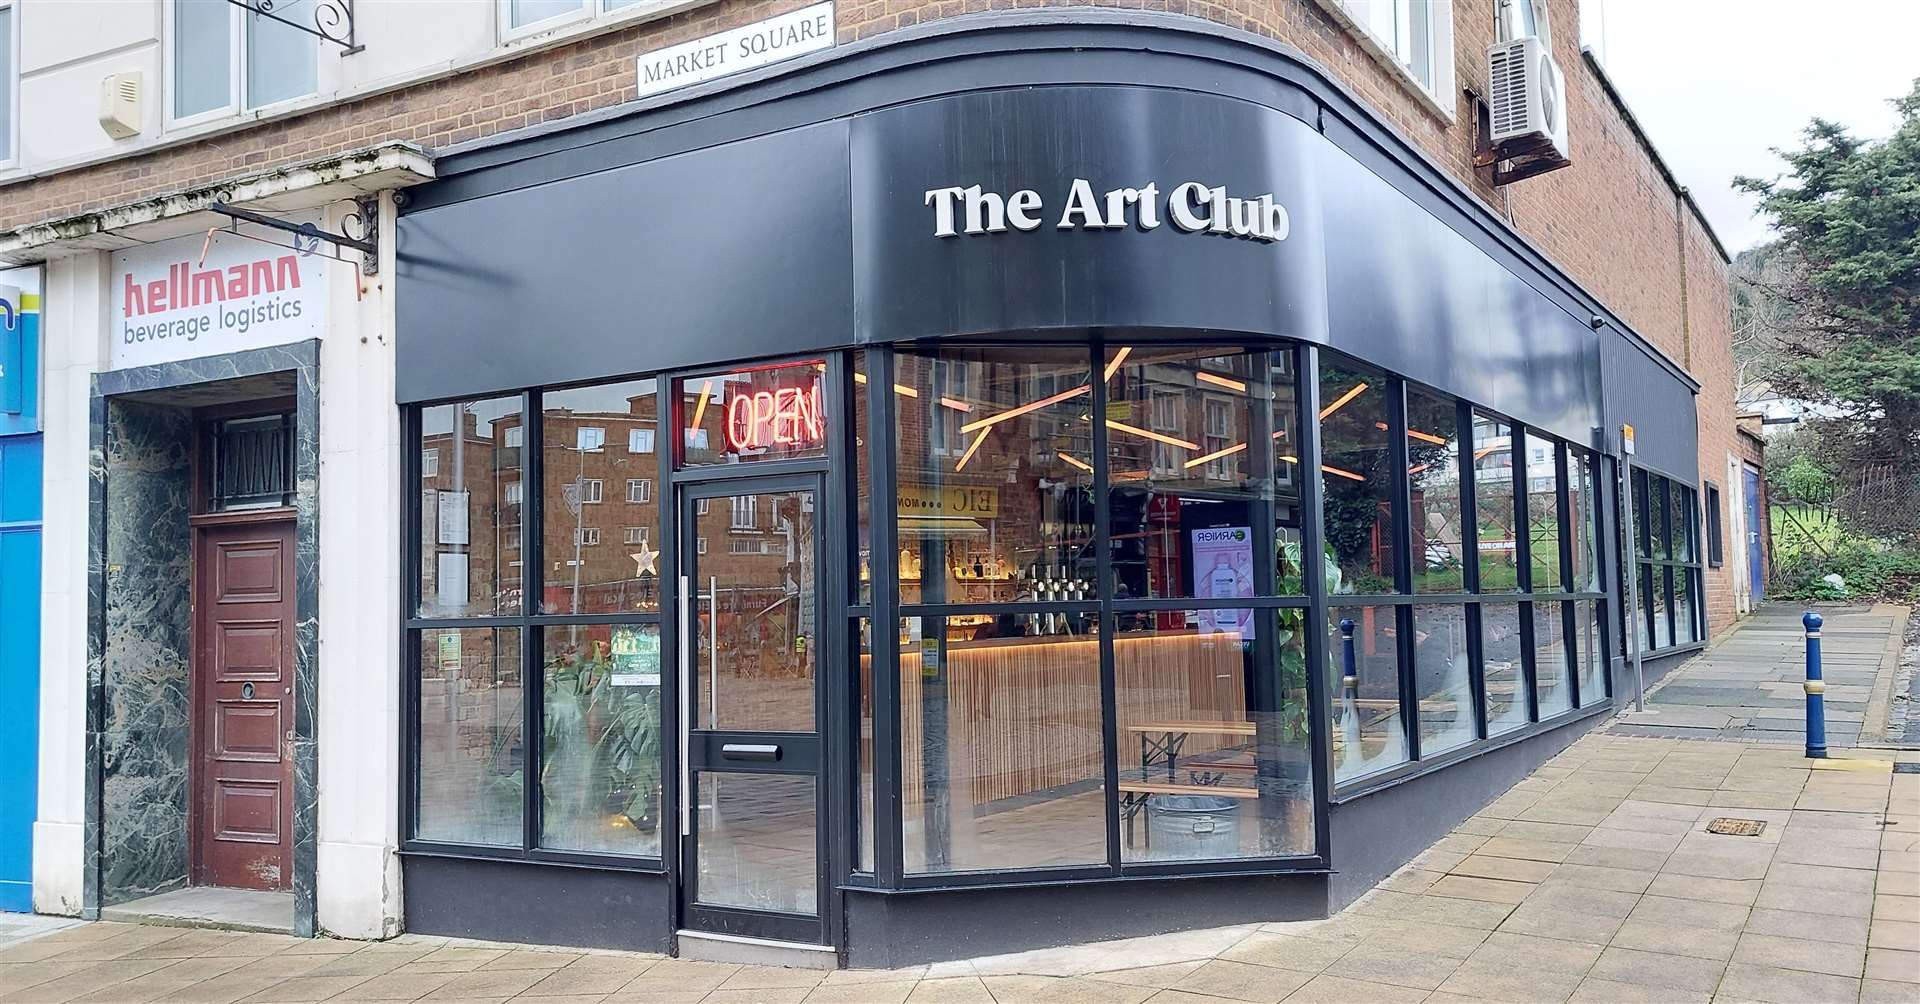 The Art Club has opened in Dover's Market Square